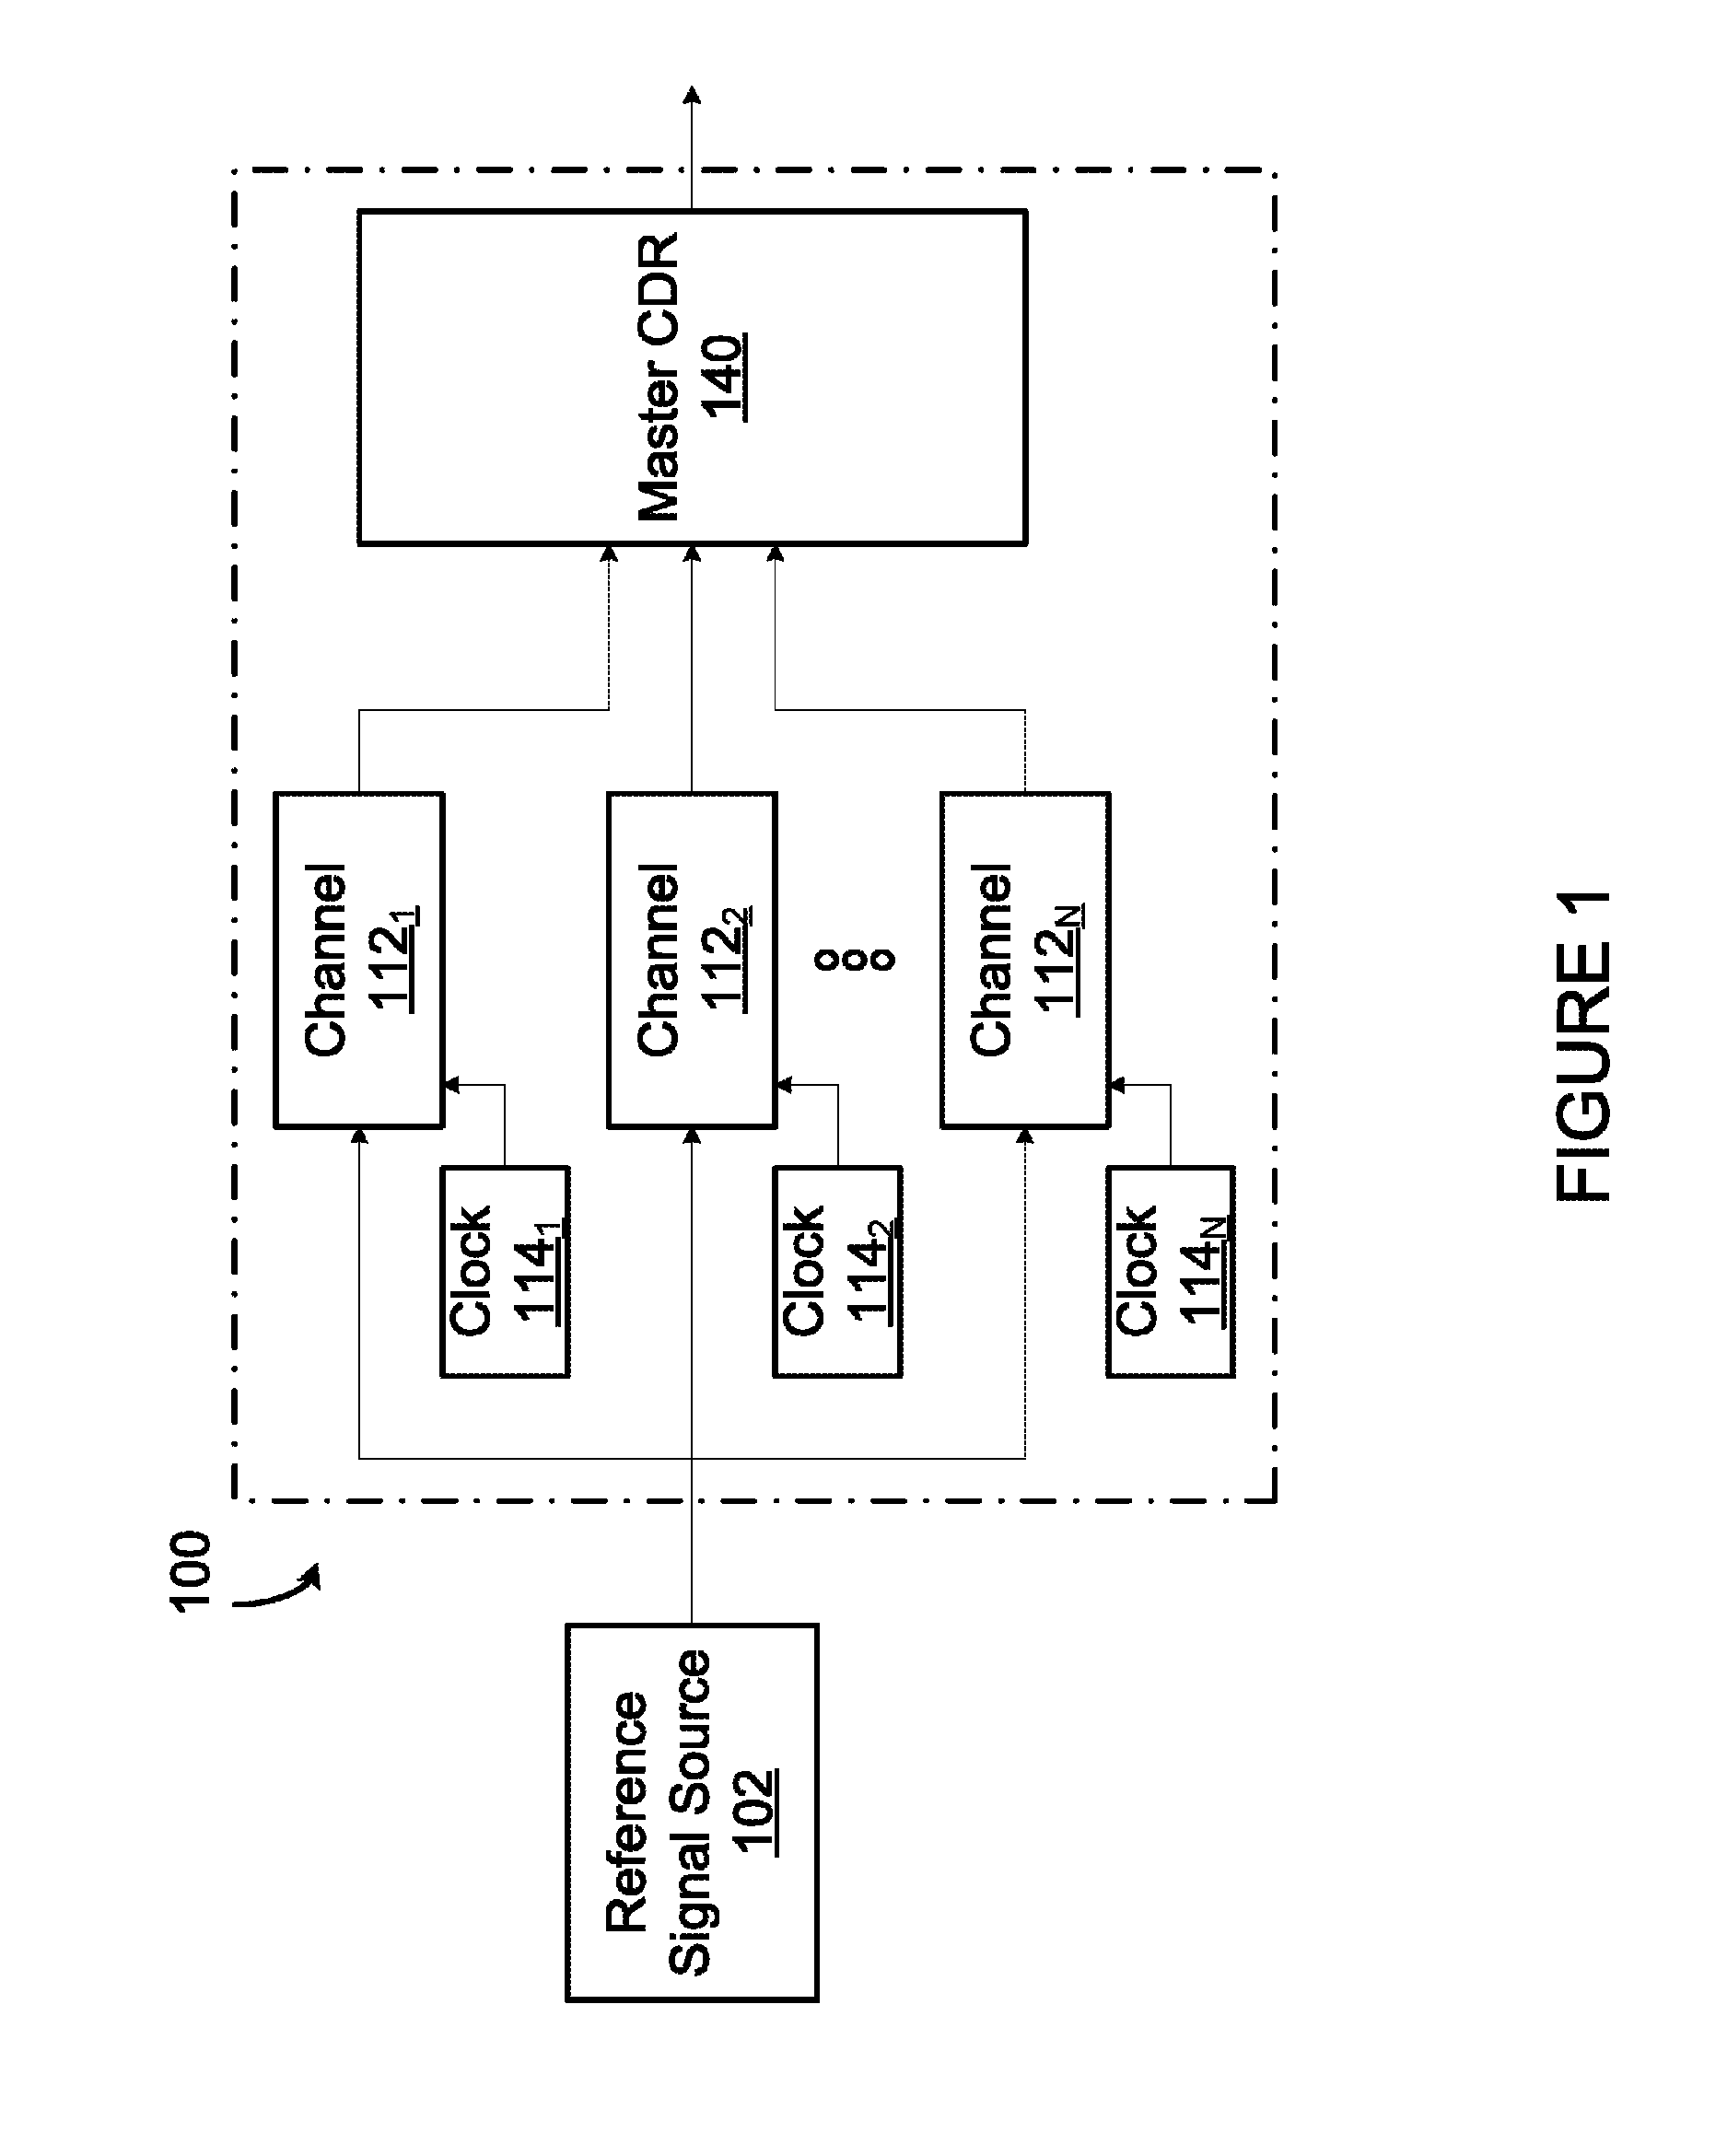 Skew detection and correction in time-interleaved analog-to-digital converters